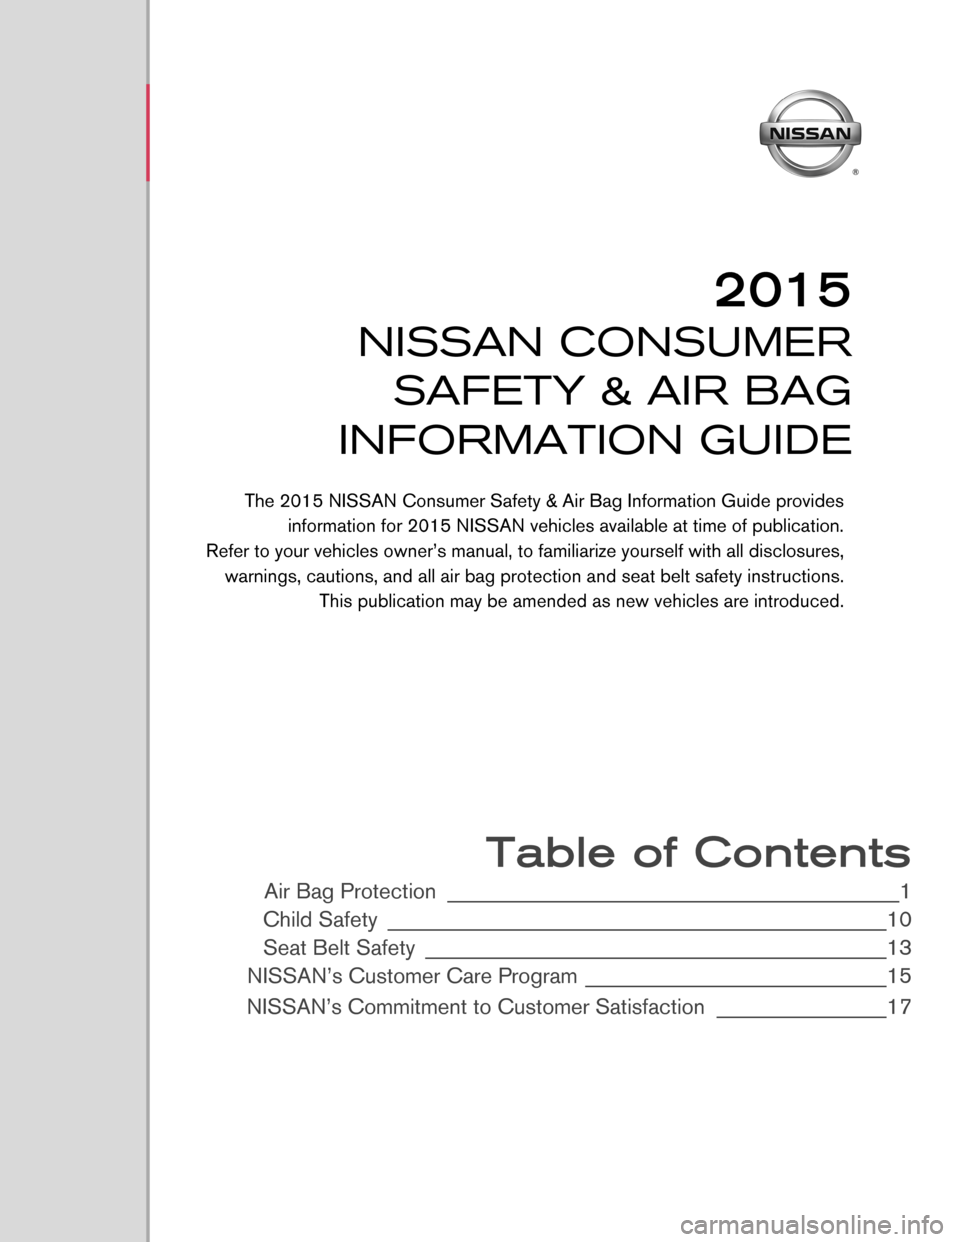 NISSAN GT-R 2015 R35 Consumer Safety Air Bag Information Guide 